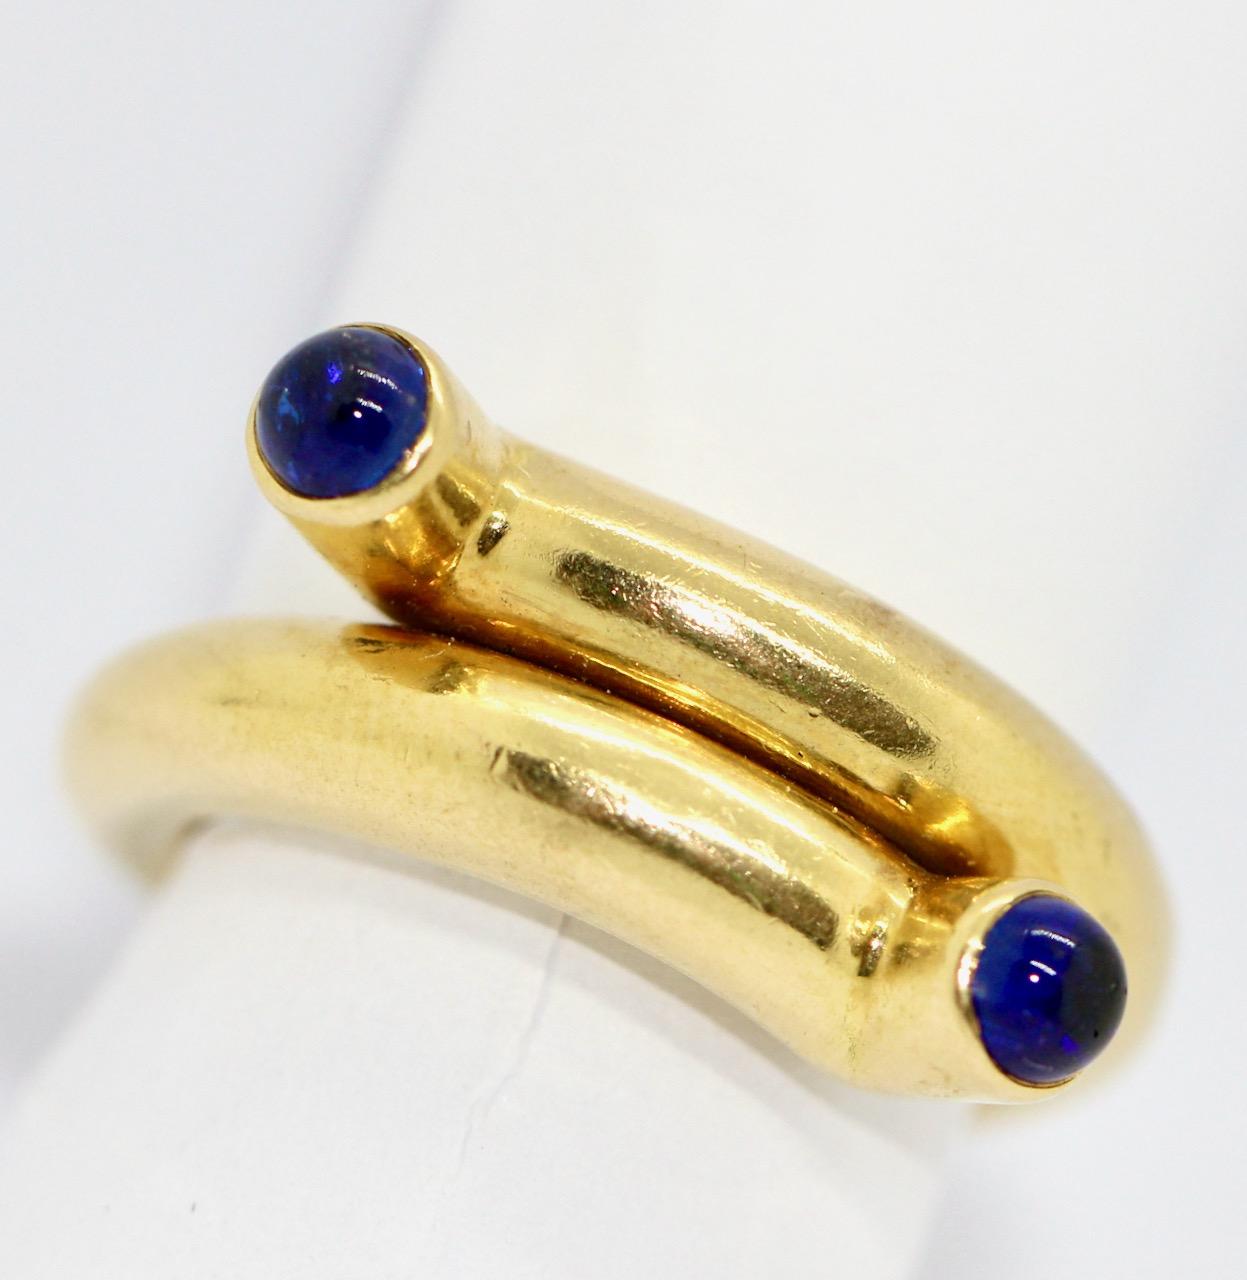 Designer Ring by Tiffany & Co, Jean Schlumberger, 18K Gold, Sapphire Cabochons For Sale 2